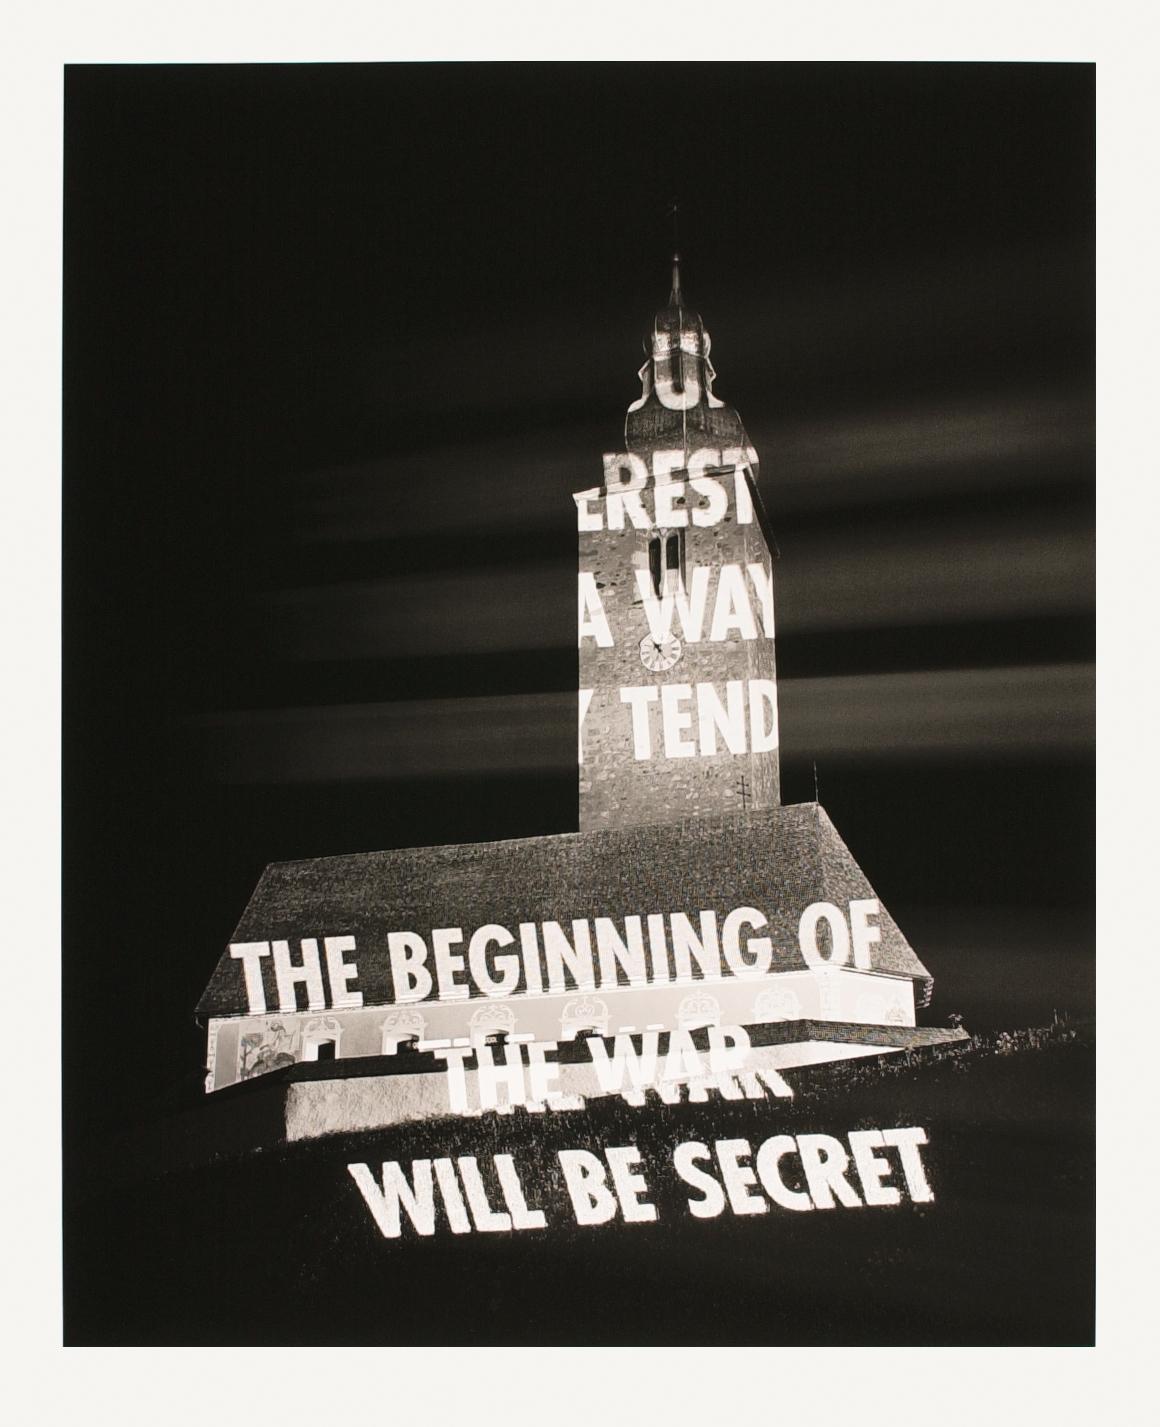 Truth Before Power - Contemporary Print by Jenny Holzer